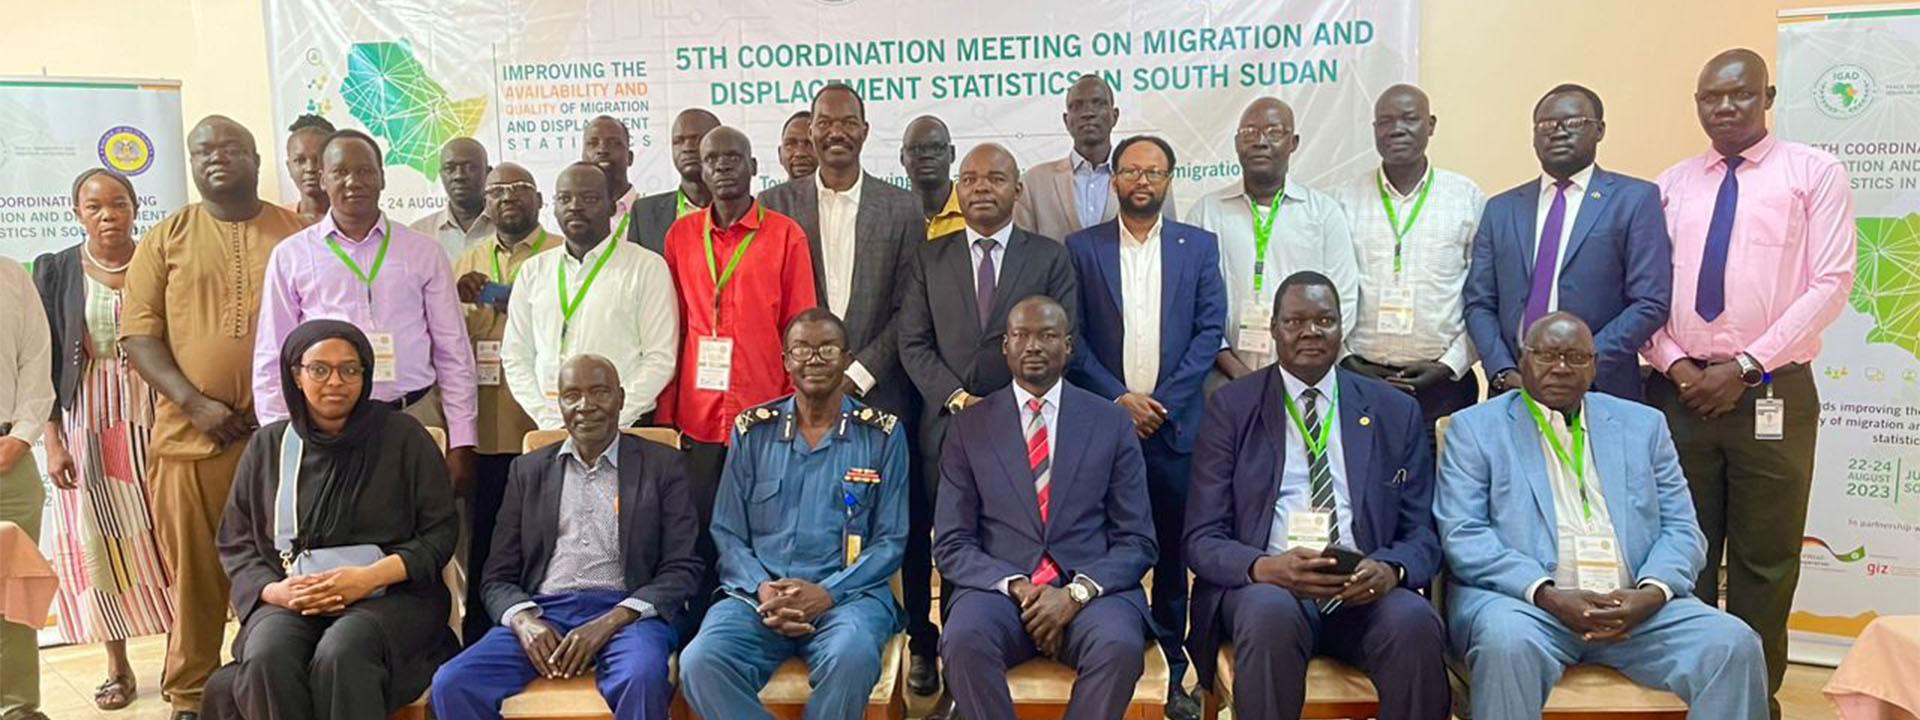 South Sudan Conducts the 5th Cordination Meeting on Migration and Displacement Statistics